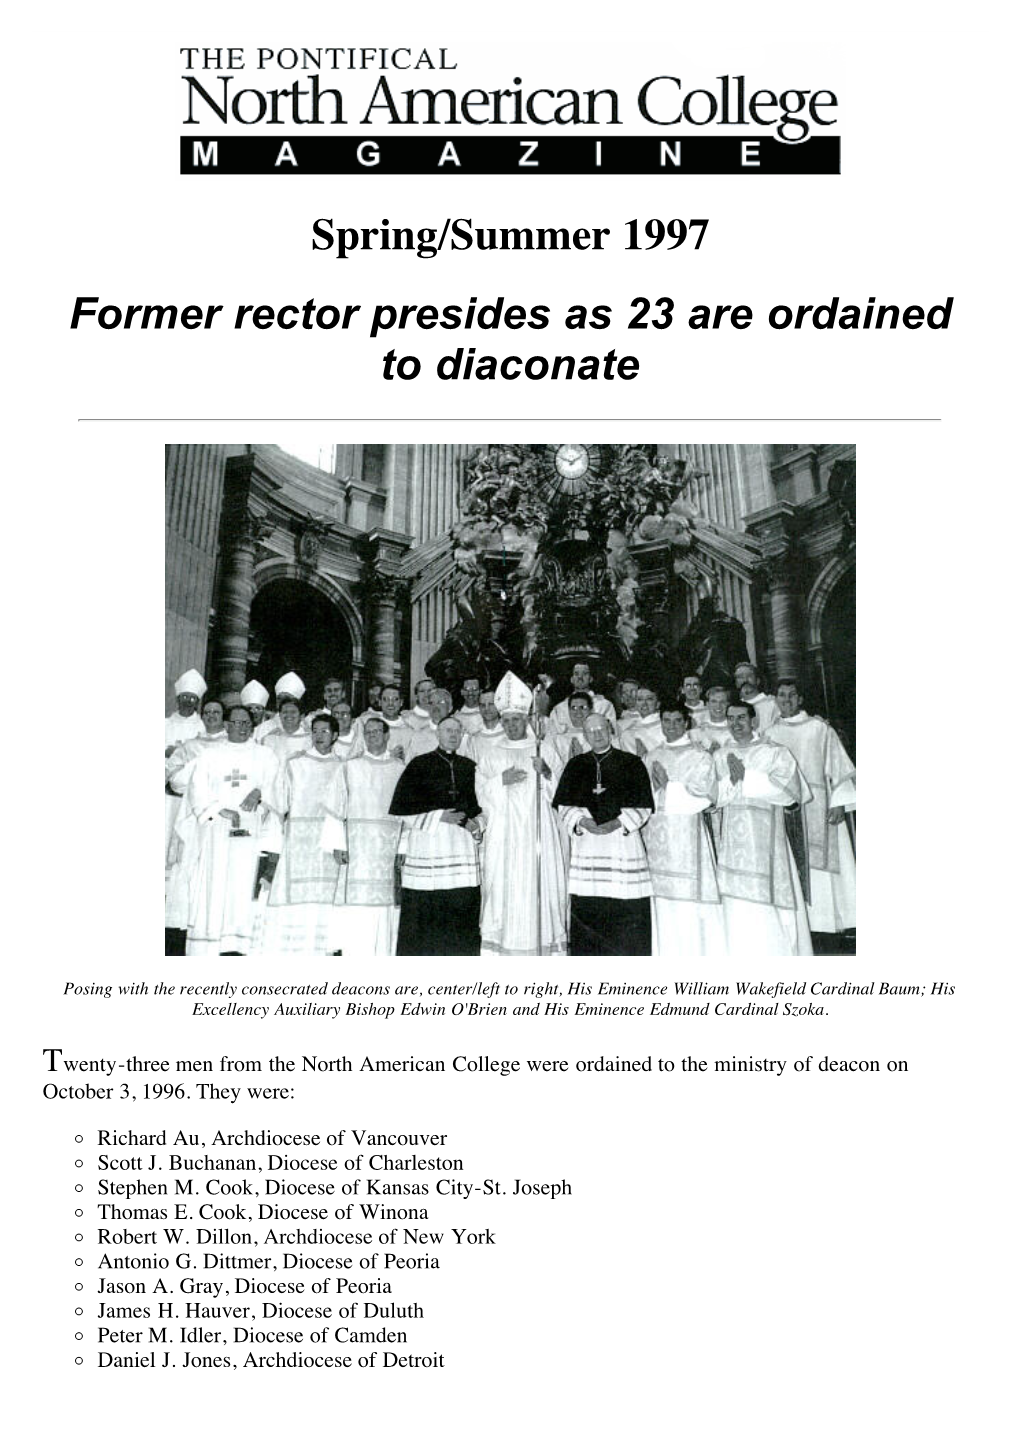 Spring/Summer 1997 Former Rector Presides As 23 Are Ordained to Diaconate